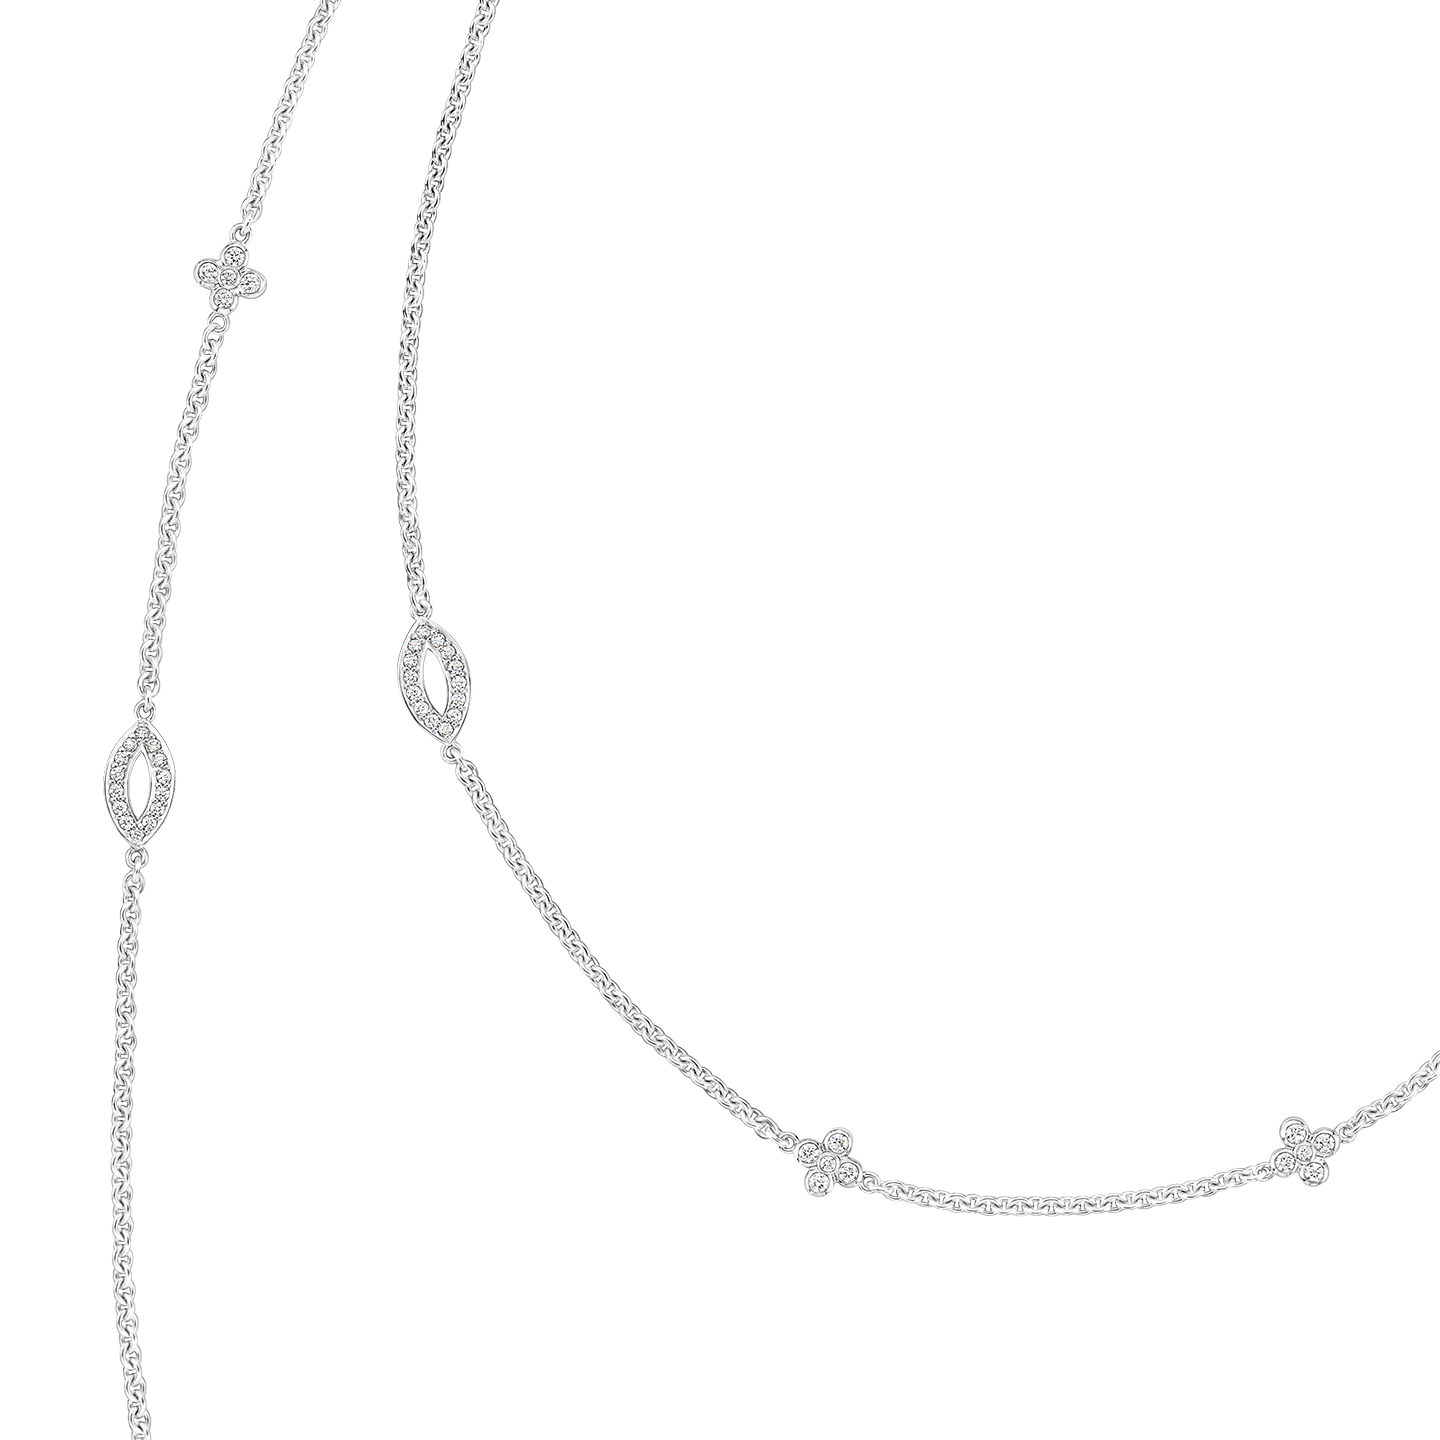 Lily Cluster Diamond Sautoir Necklace in Platinum, Product Image 2